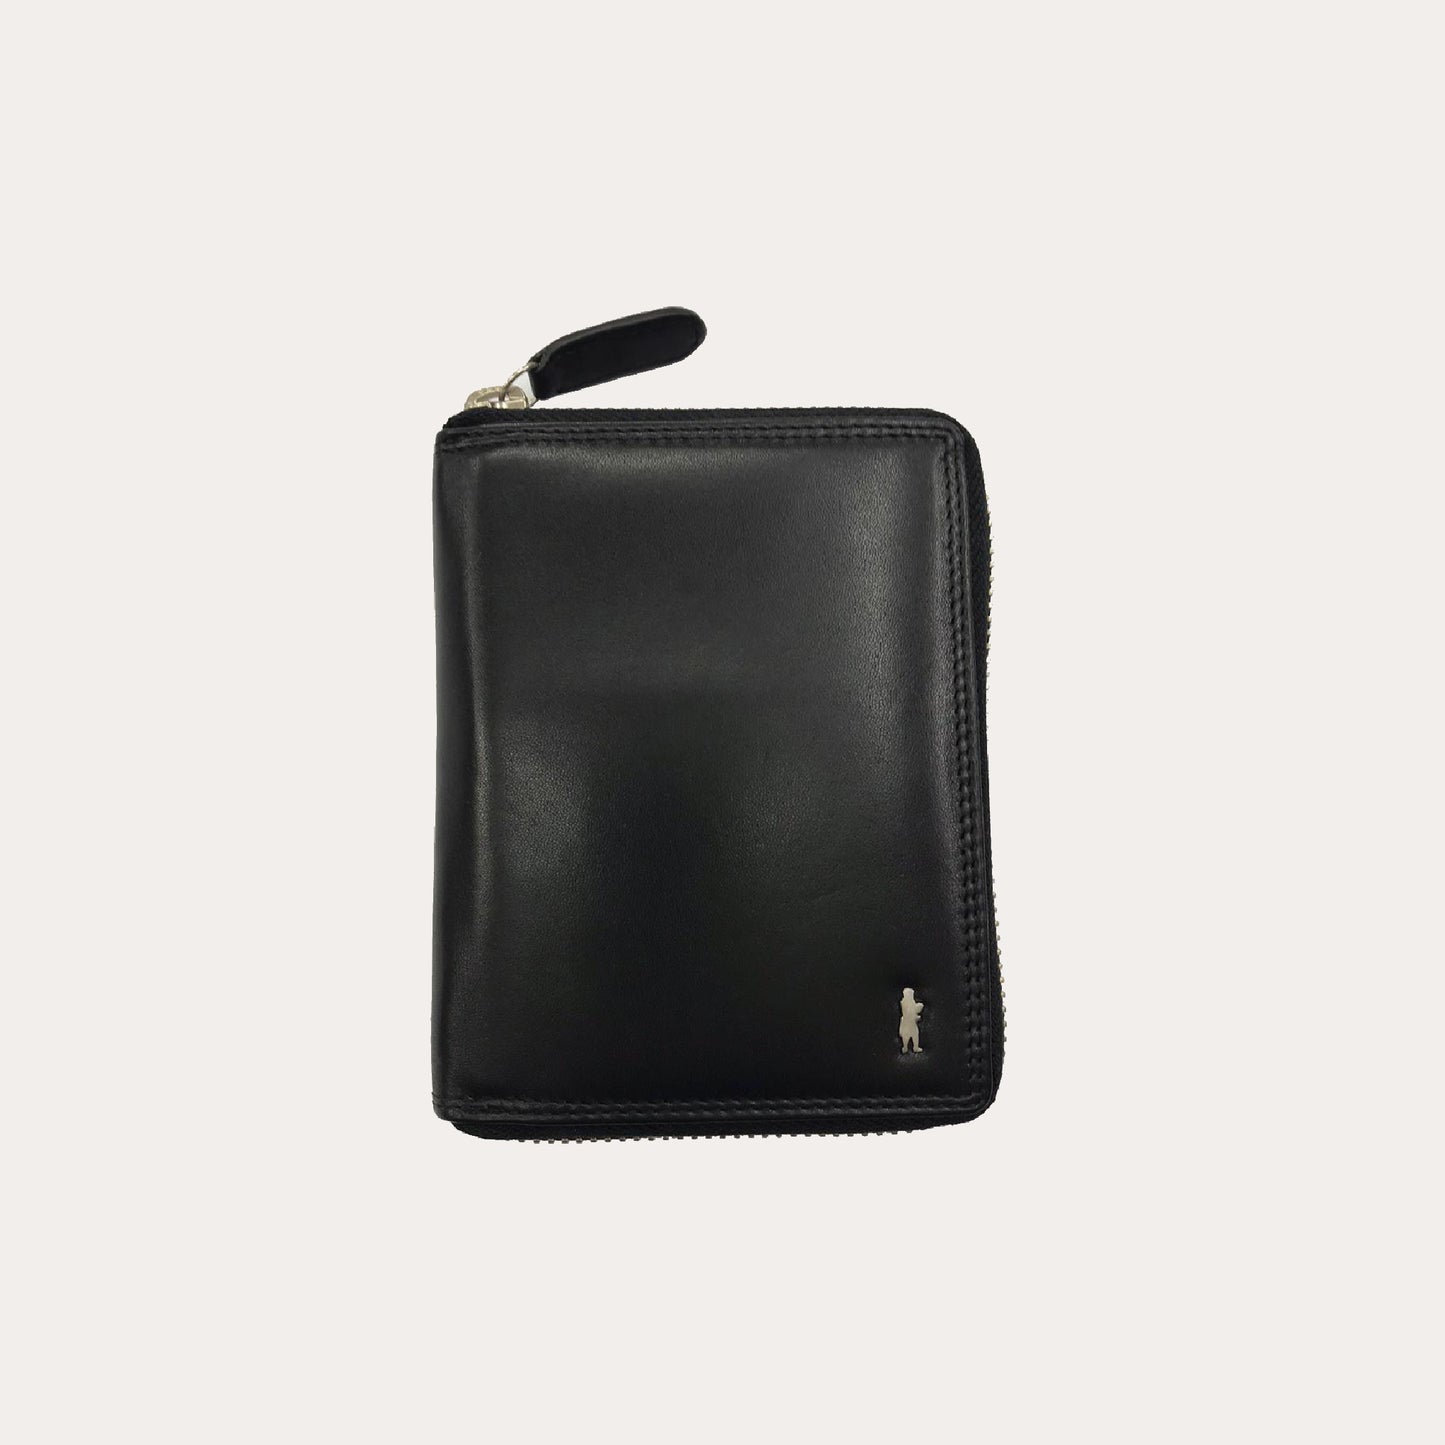 Gianni Conti Black Leather Wallet-8 Credit Card/Coin Section